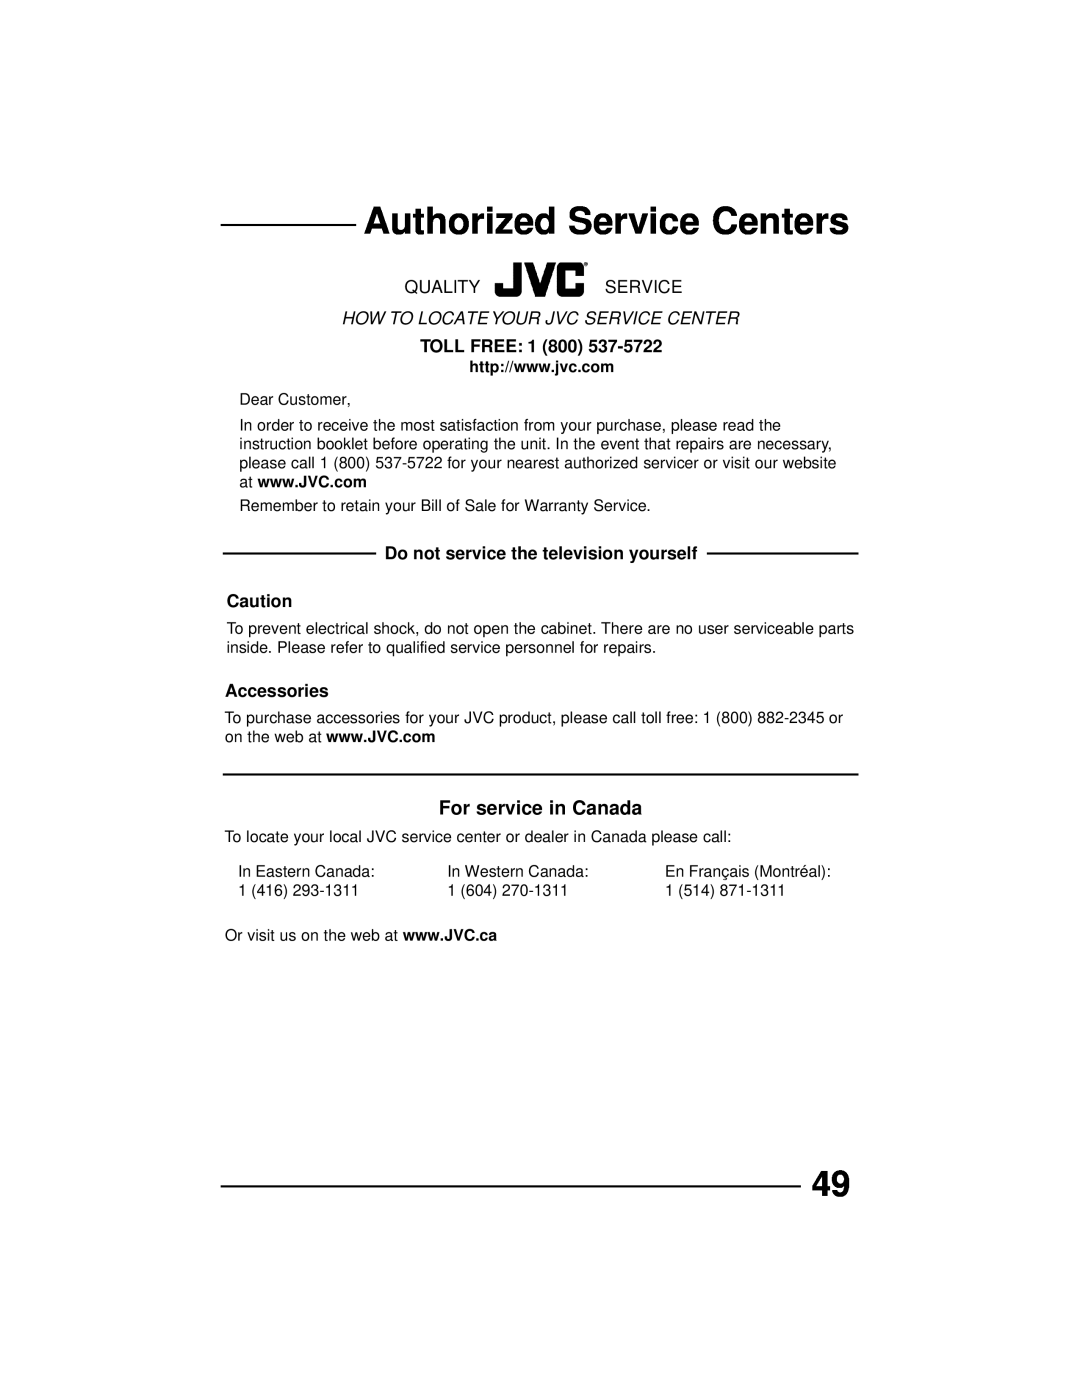 JVC AV 36D202 Authorized Service Centers, For service in Canada, Qualityservice, How To Locate Your Jvc Service Center 